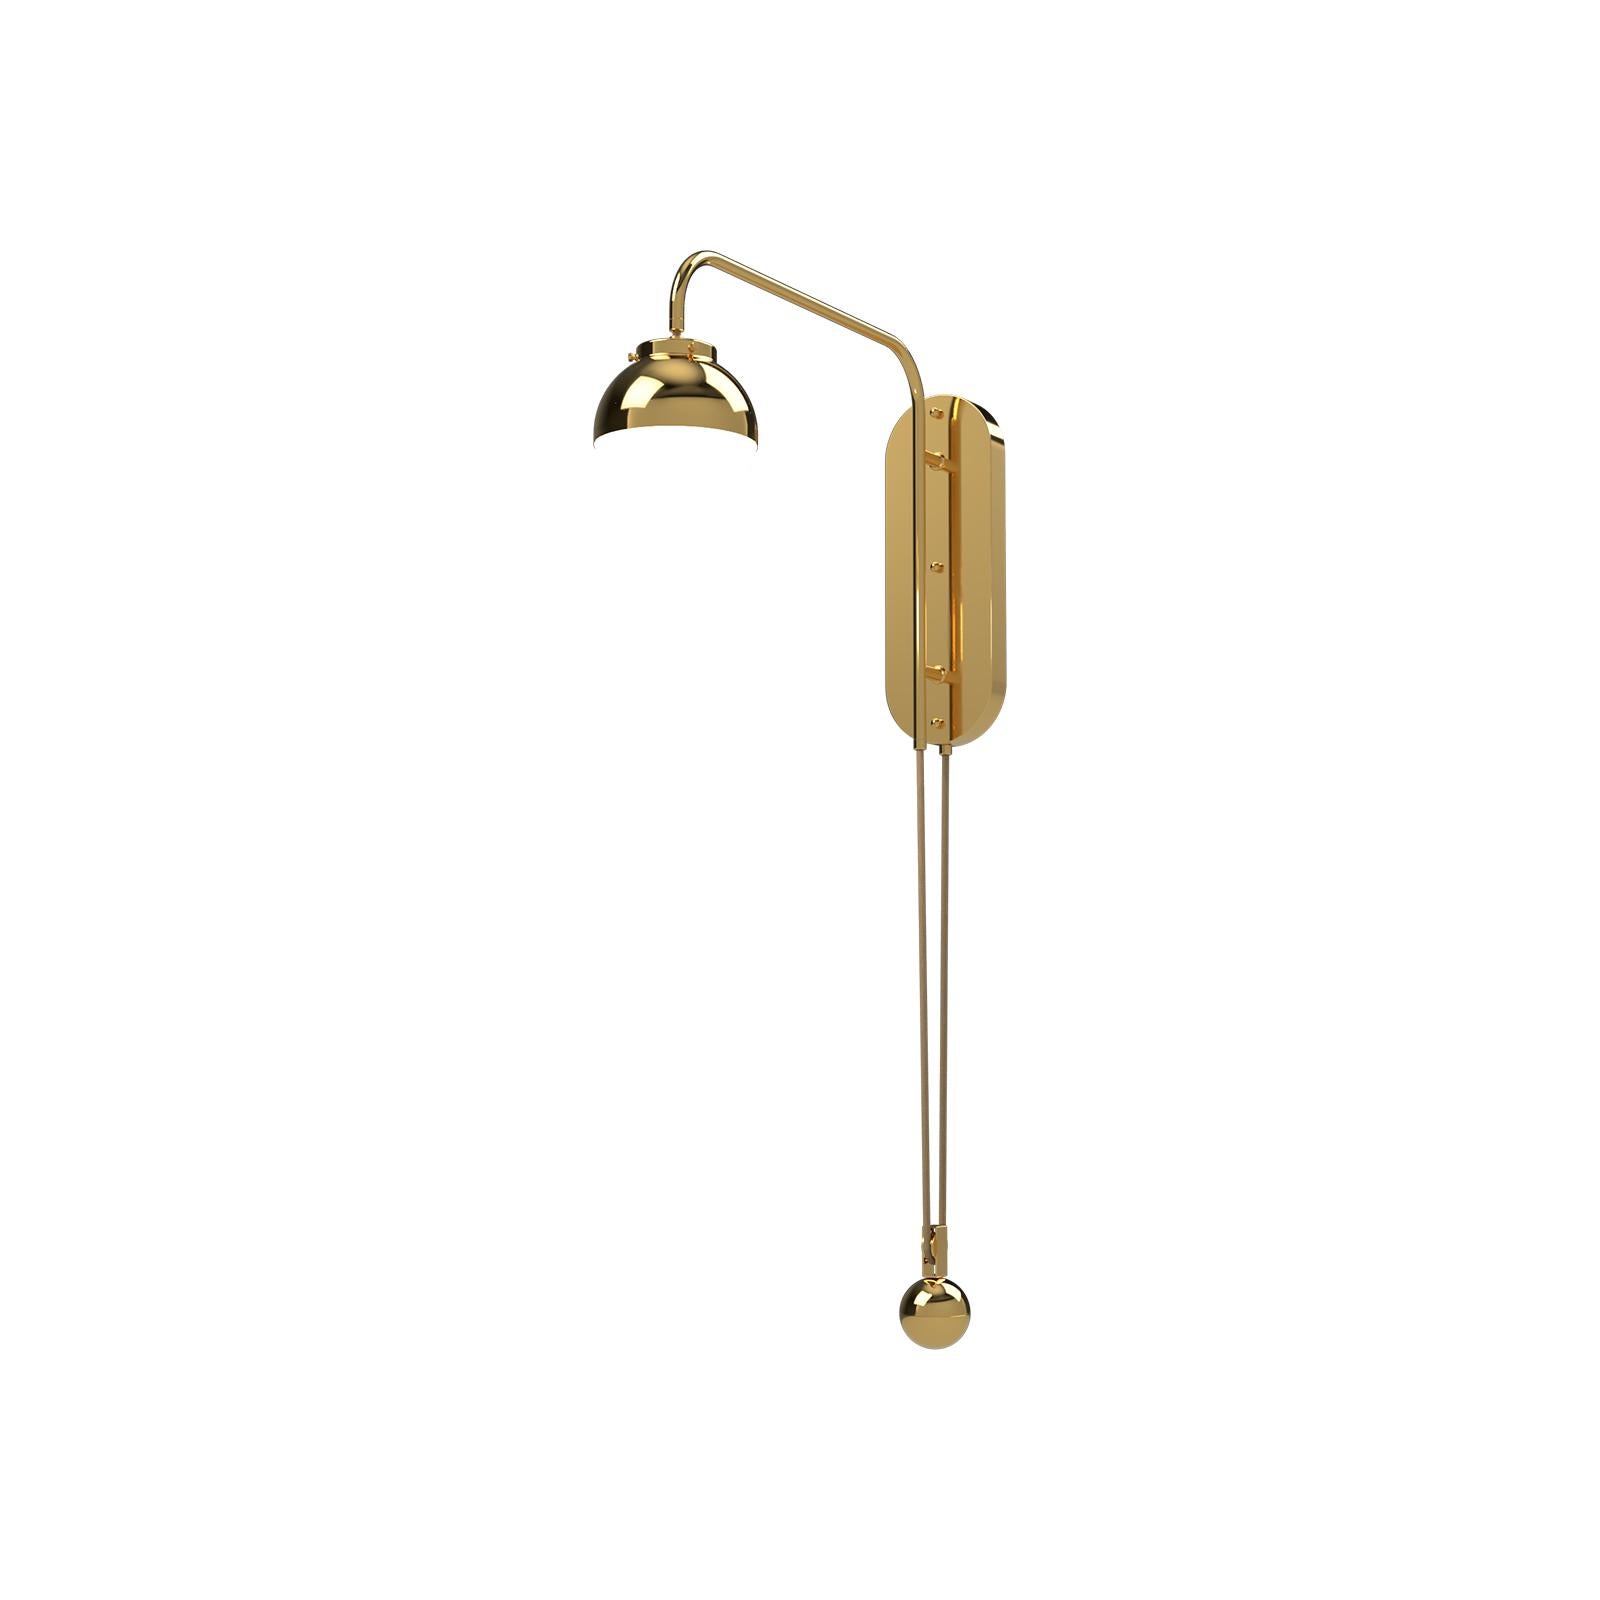 Elegant wall-lamp with a pulley made in brass, with a glass-shade
Most components according to the UL regulations, with an additional charge we will UL-list and label our fixtures.